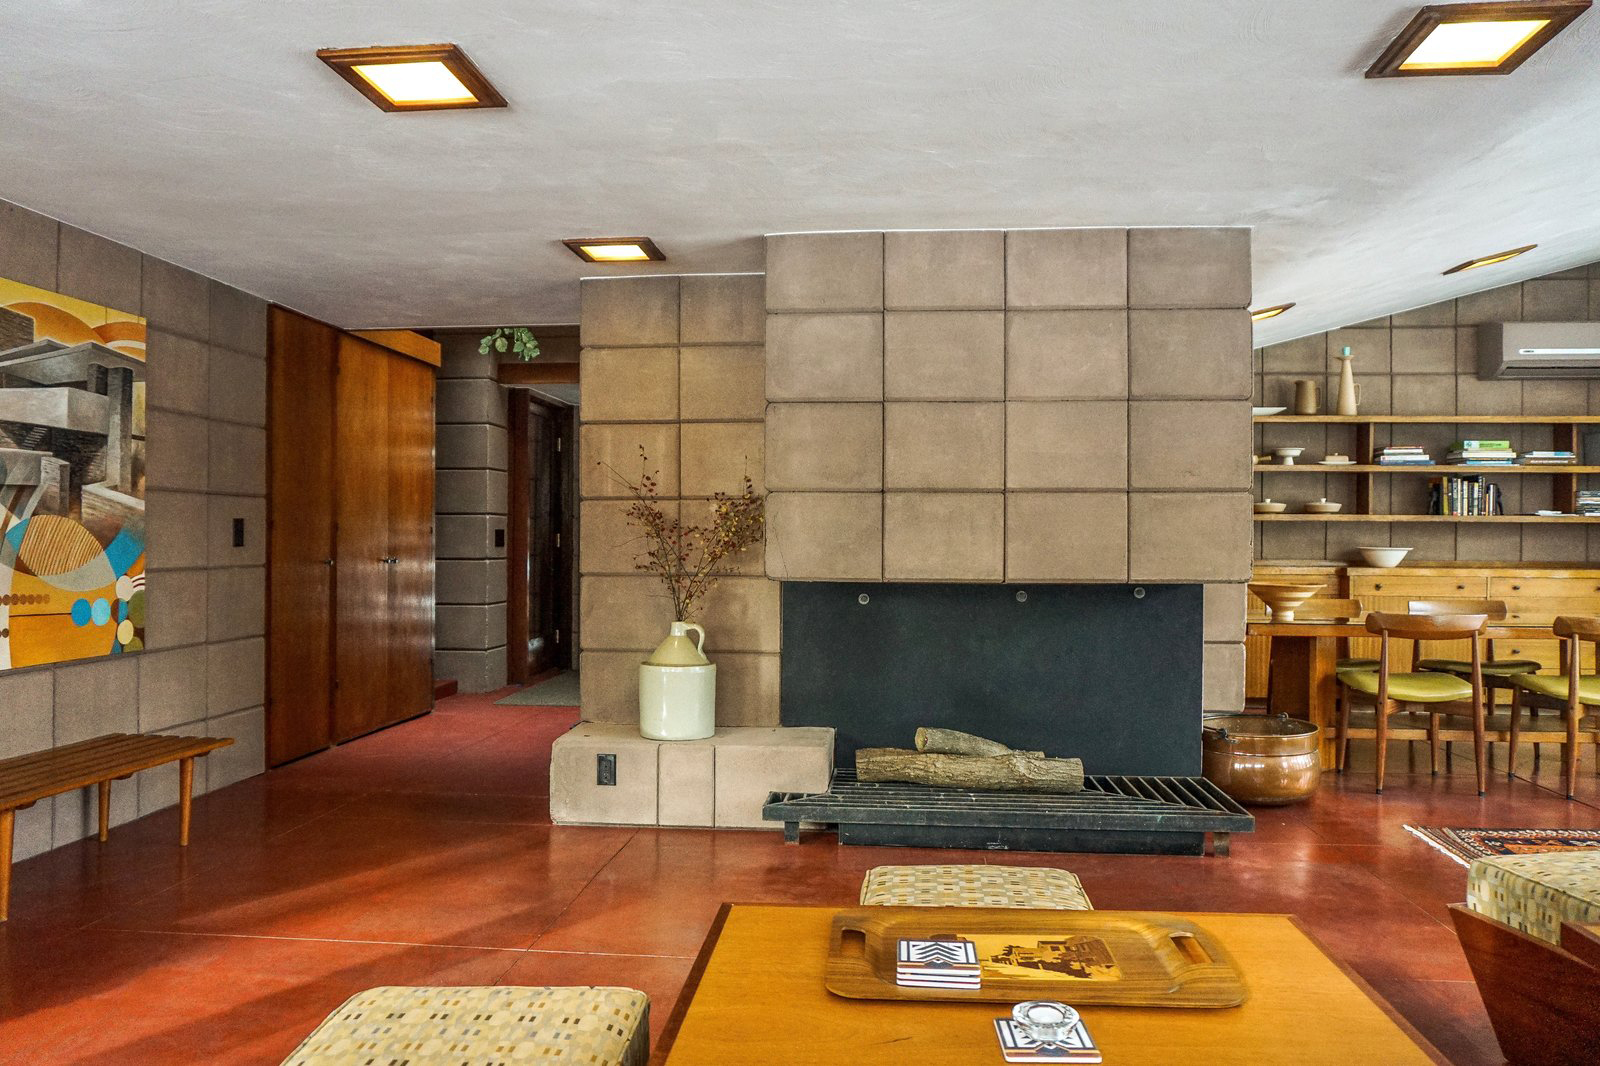 Frank Lloyd Wright’s Eppstein House in Michigan is available to rent